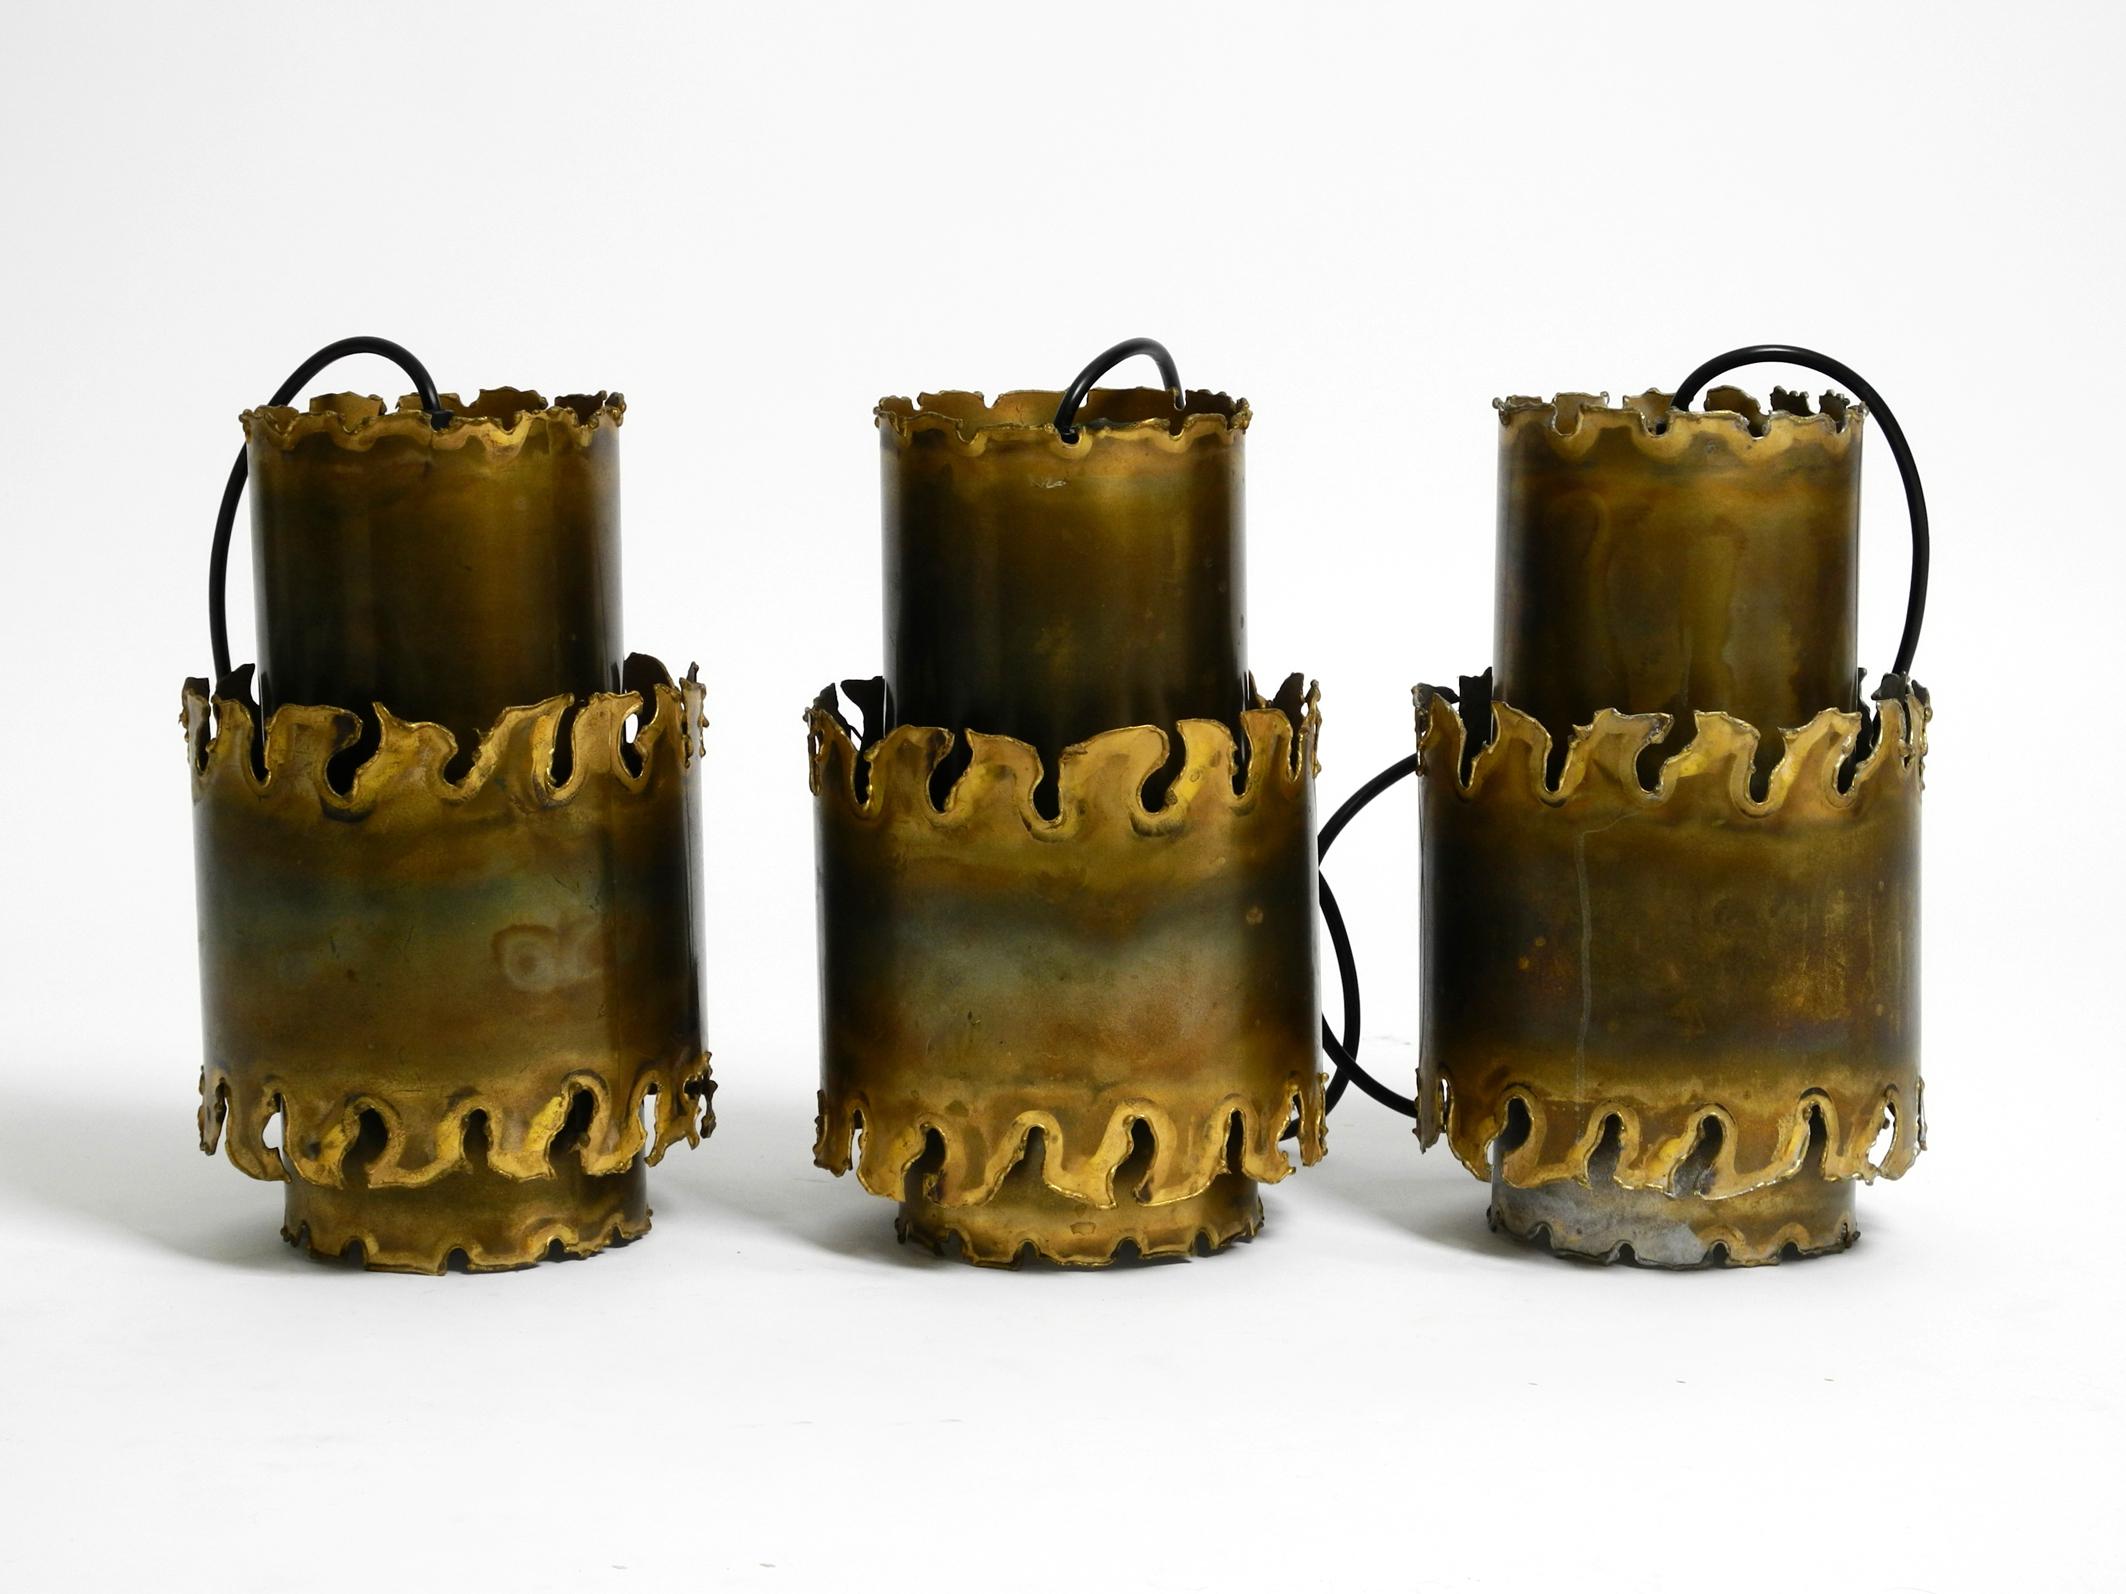 Three very nice 1960s brass hanging lamps.
Handmade. Brutalist design by Holm Sorensen. Made in Denmark.
Very good original vintage condition. Great design in a rare shape.
Creates a very pleasant warm light.
The brass shades have no damages such as